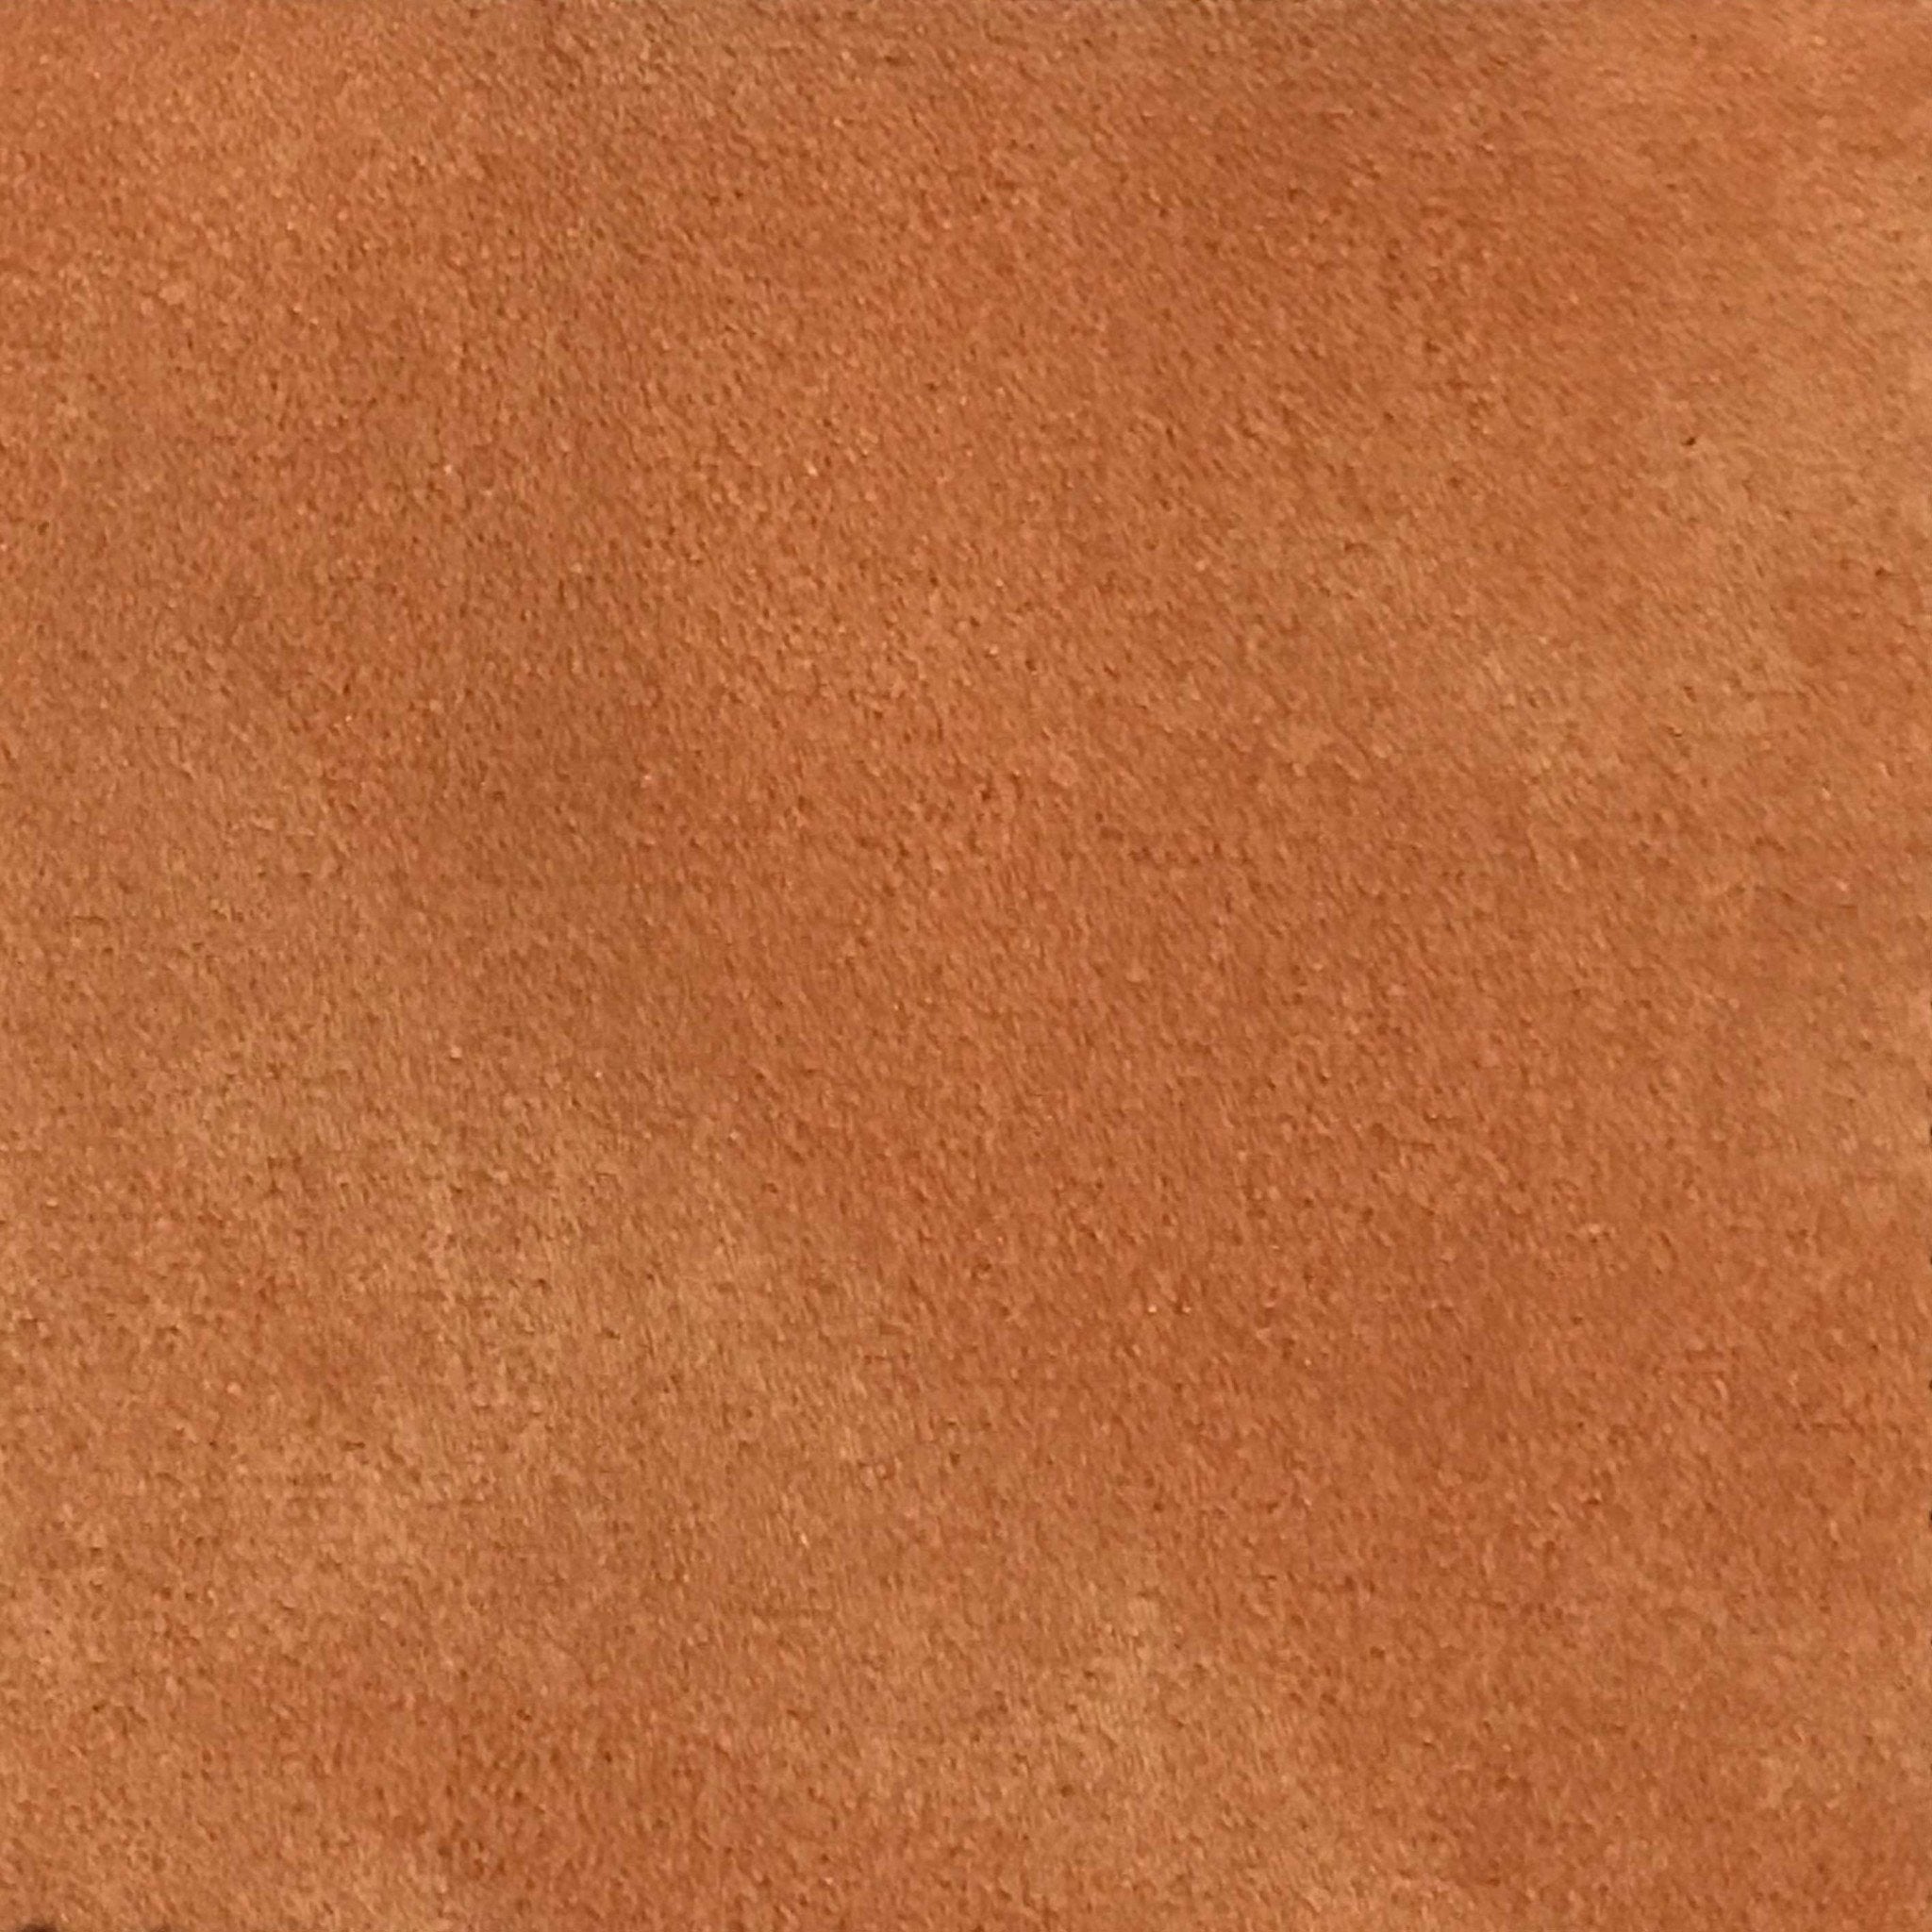 Global - Light Suede, Microsuede Fabric by the Yard - Available in 30